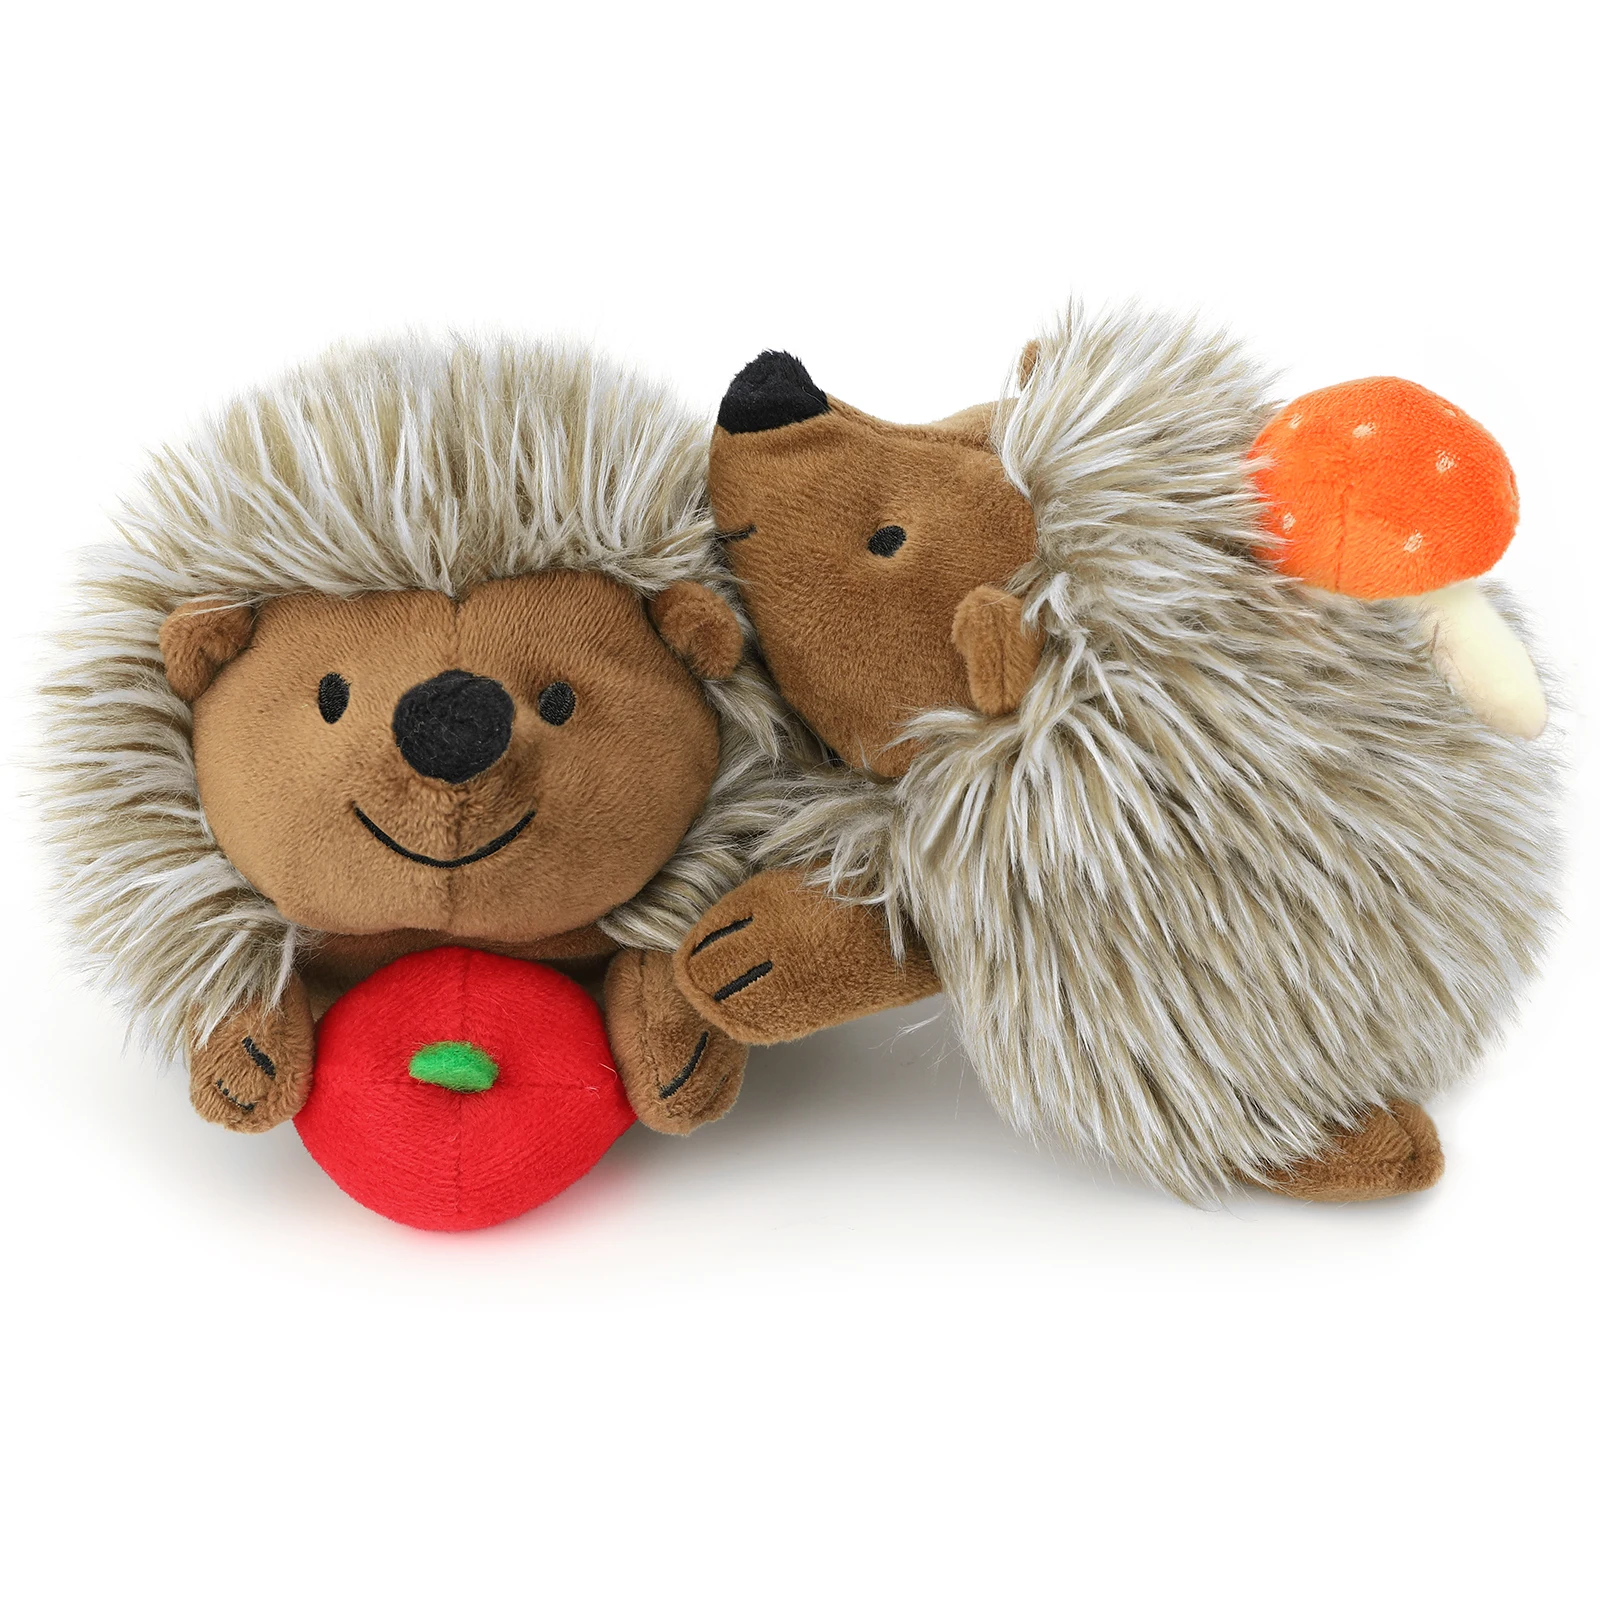 

VavoPaw Dog Squeak Toy, Stuffed Soft Plush Hedgehog Shaped, Cute Apple & Mushroom Decoration for Dogs Biting Chewing Playing, Colorful